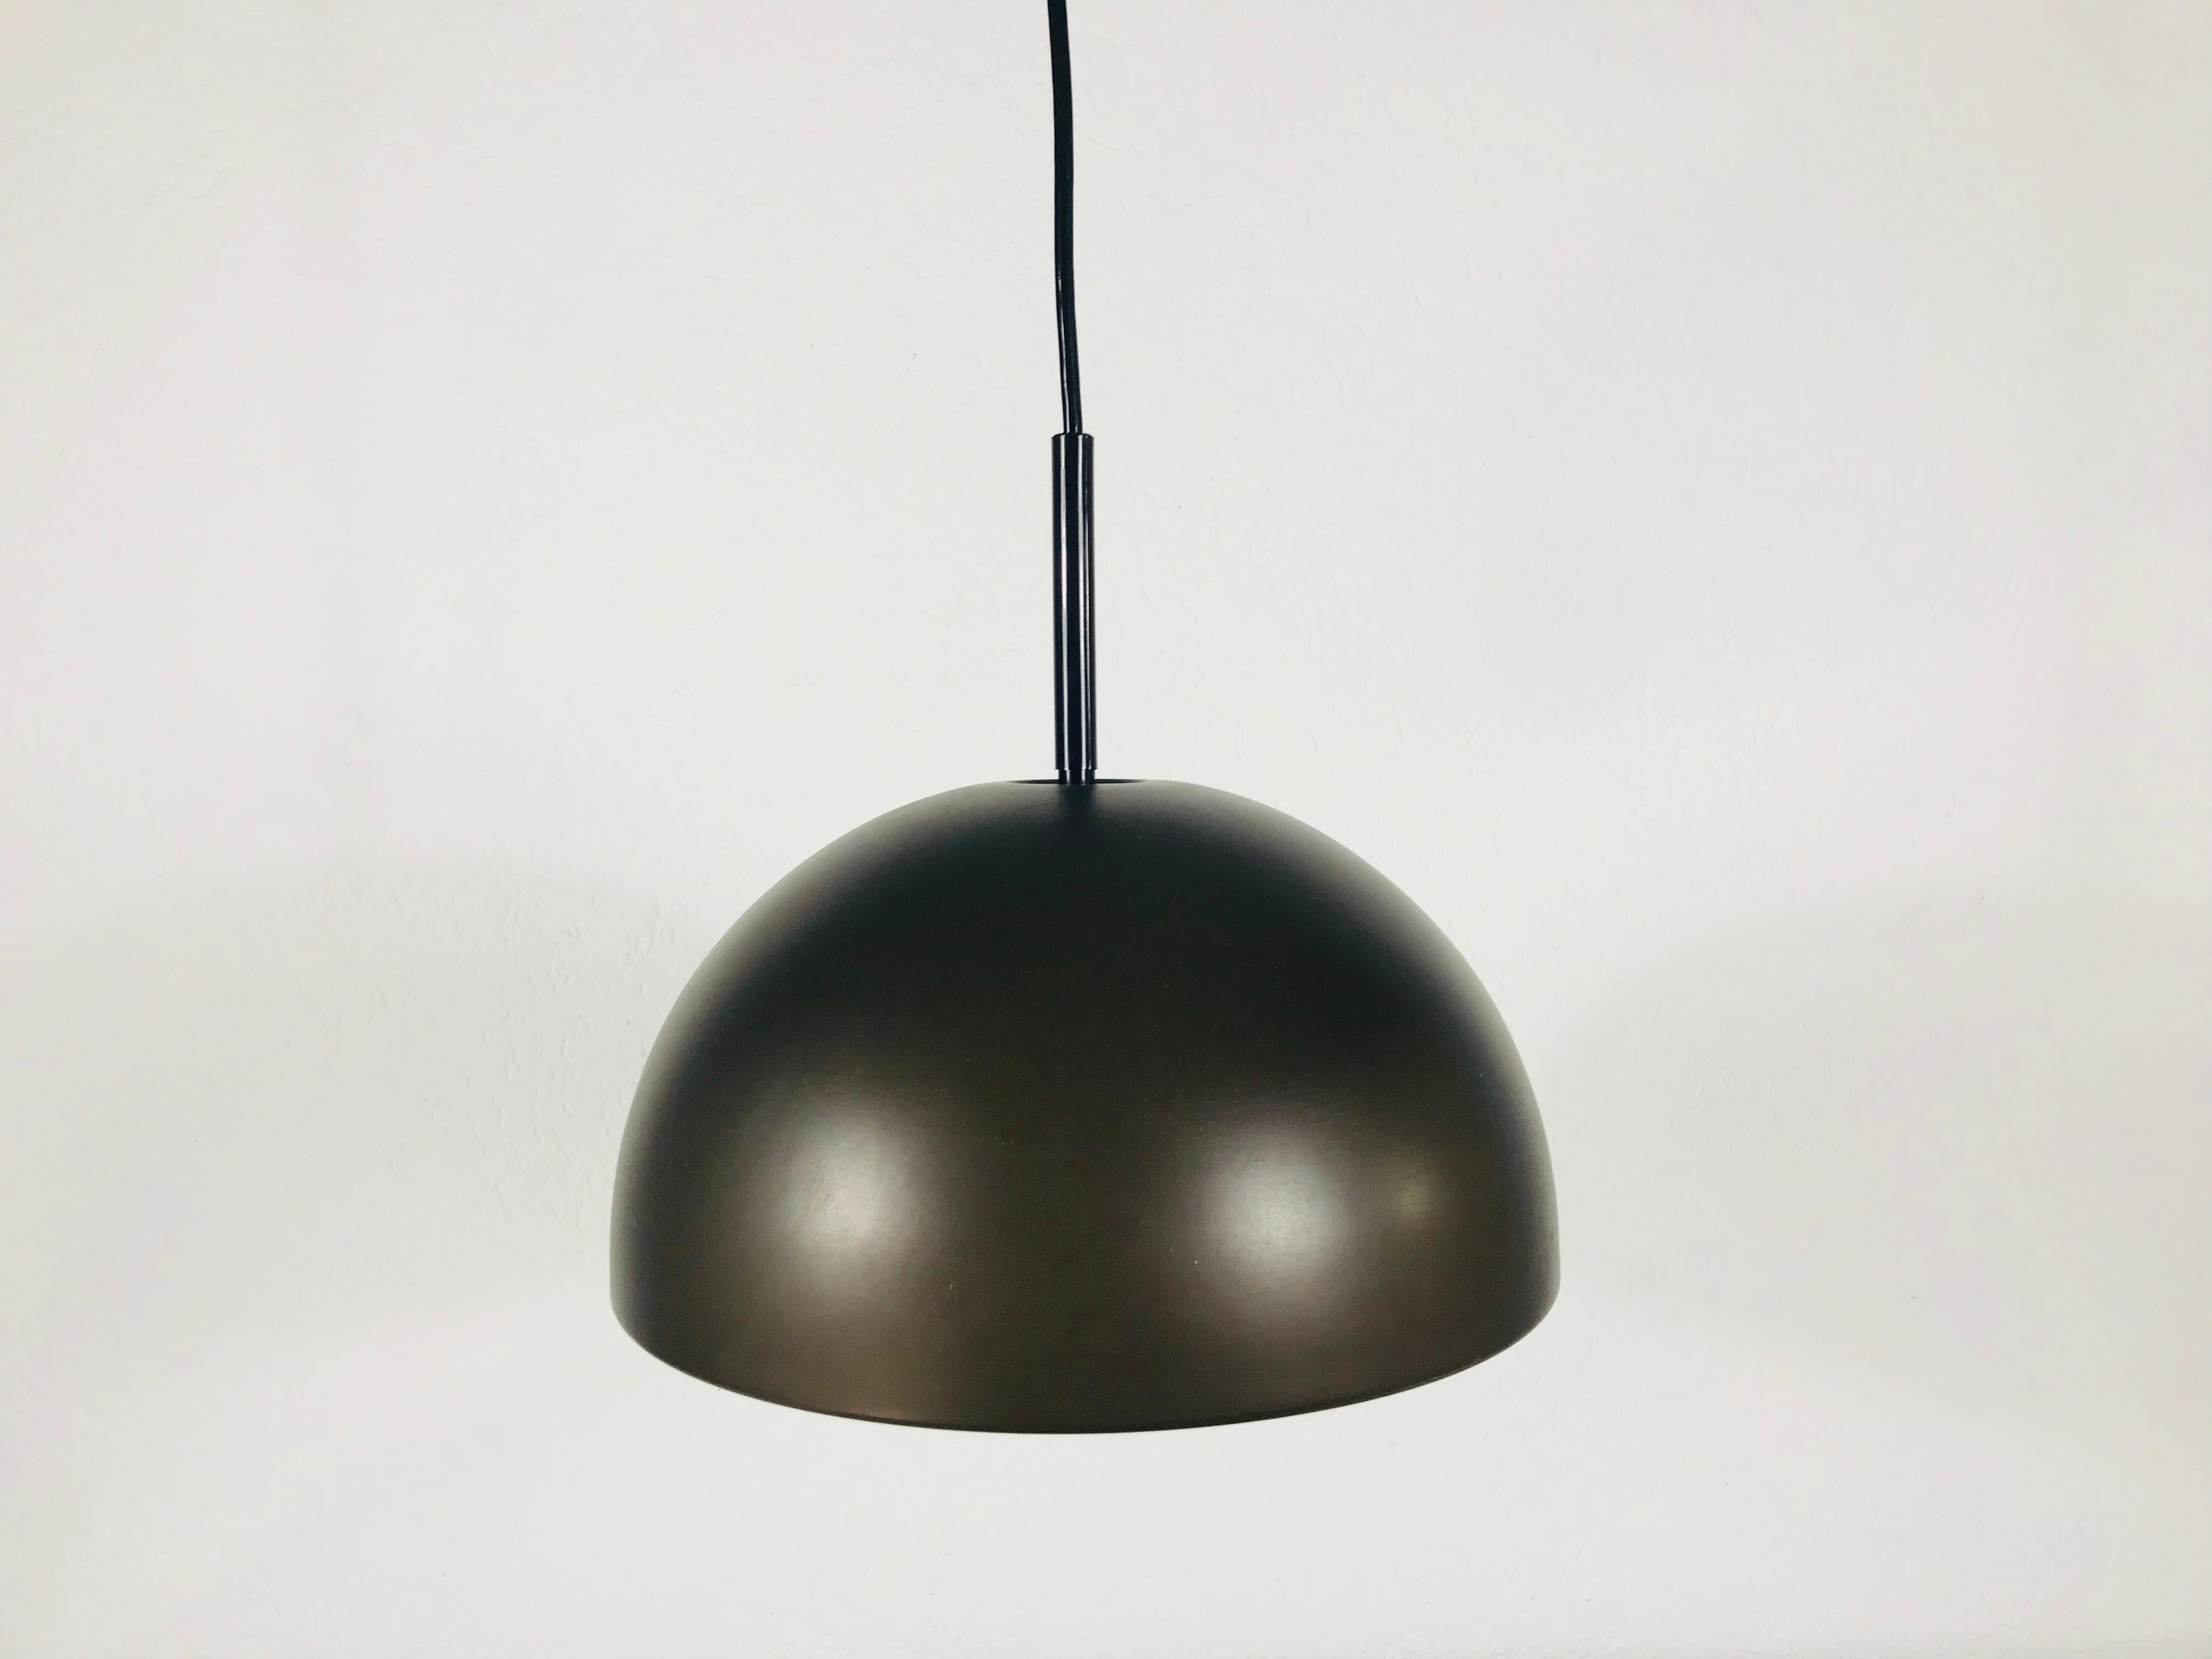 Staff brown hanging lamp made in Germany in the 1970s. The brown lamp shade is made of bakelit. It has a round white plastic discus which is secure to the bottom of the lamp.

The light requires one E27 light bulb.